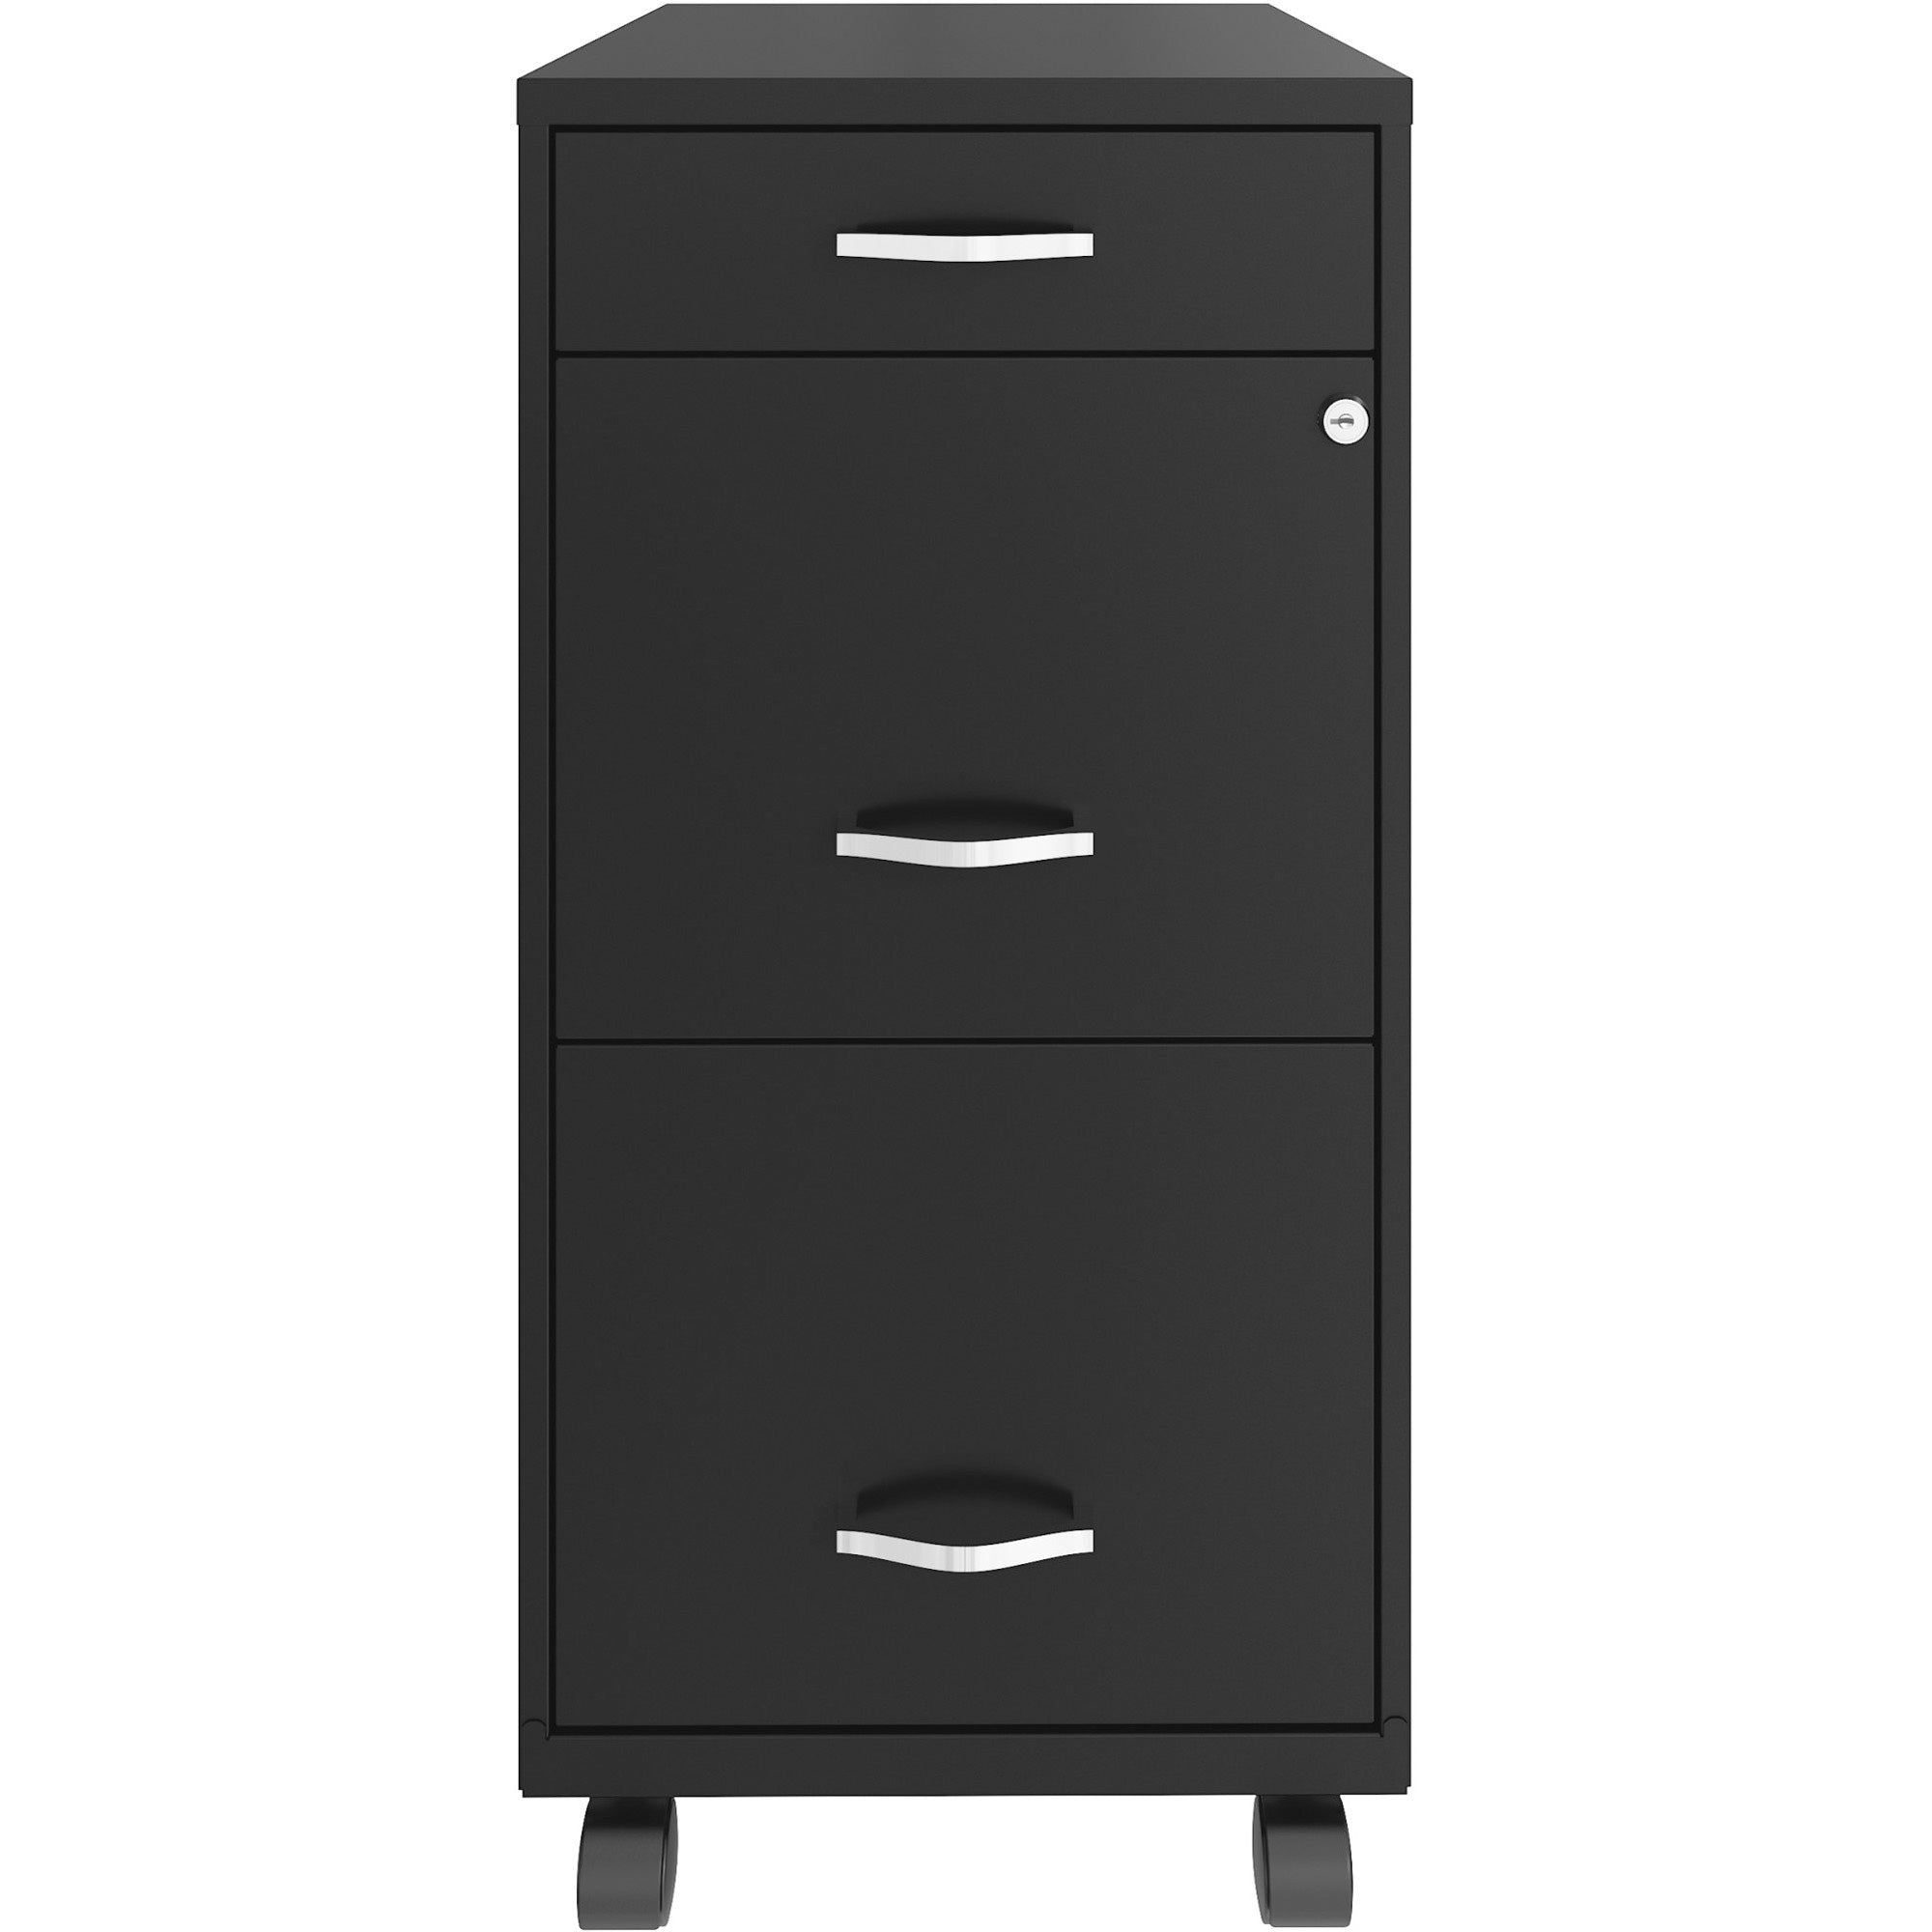 nusparc-mobile-file-cabinet-142-x-18-x-295-3-x-drawers-for-file-box-letter-mobility-locking-drawer-glide-suspension-3-4-drawer-extension-cam-lock-nonporous-surface-black-painted-steel-recycled_nprvf318bmbk - 2